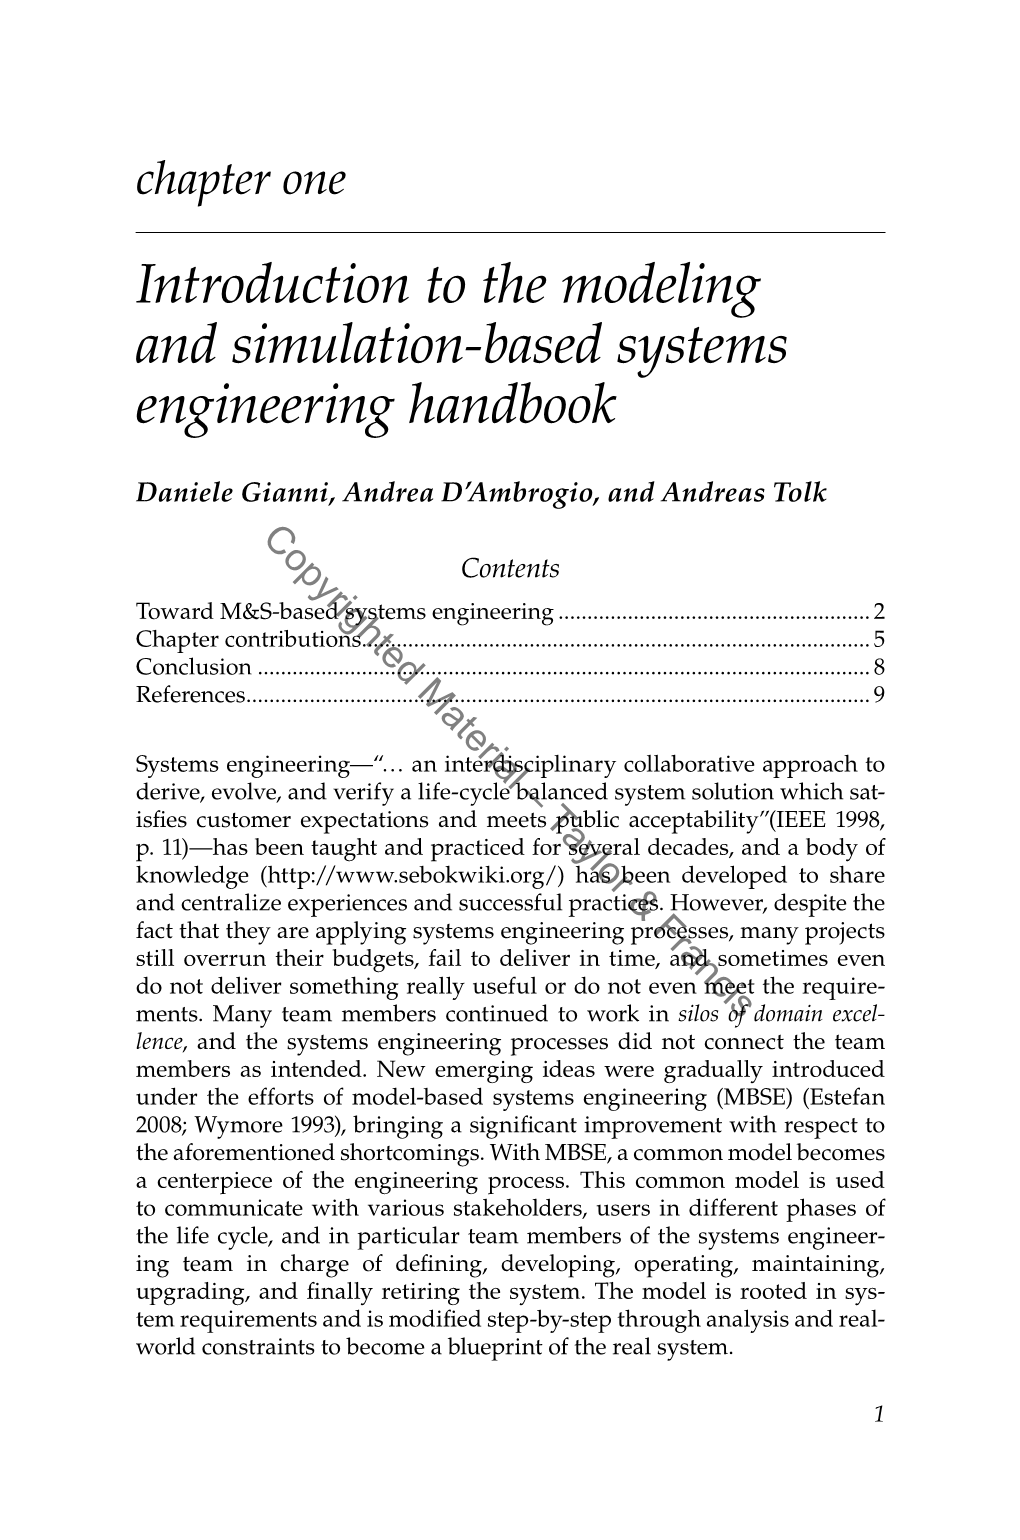 Introduction to the Modeling and Simulation-Based Systems Engineering Handbook